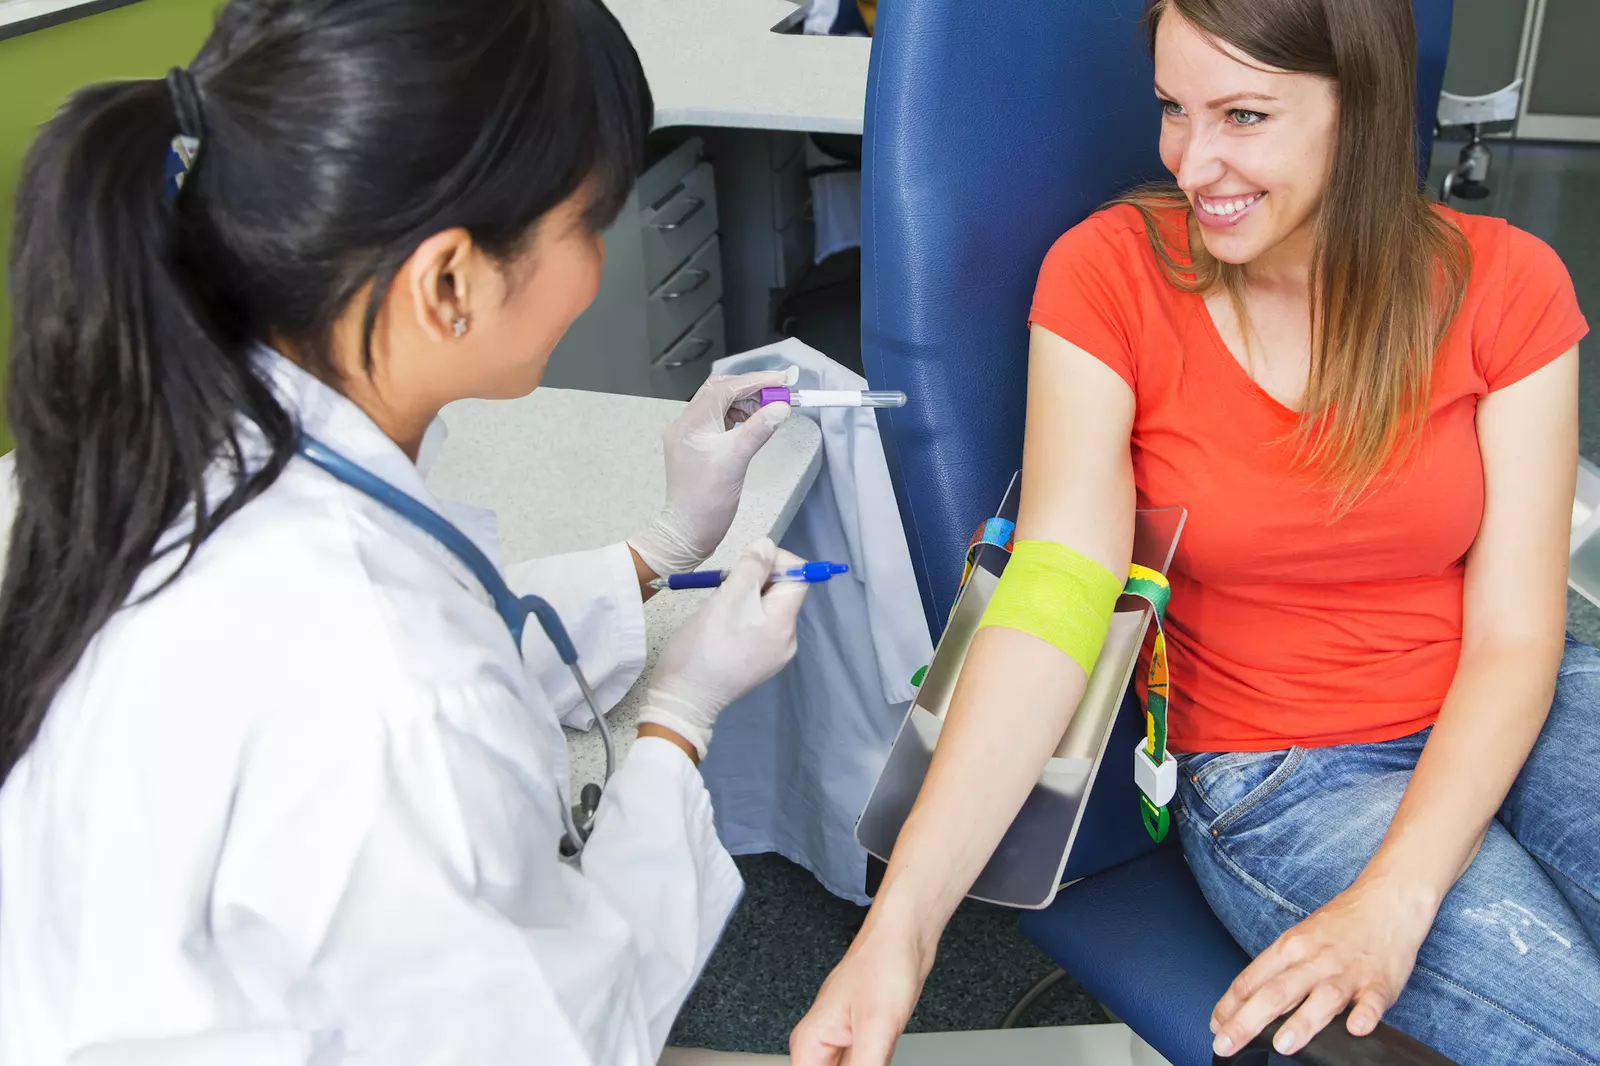 Woman preparing to have her blood drawn